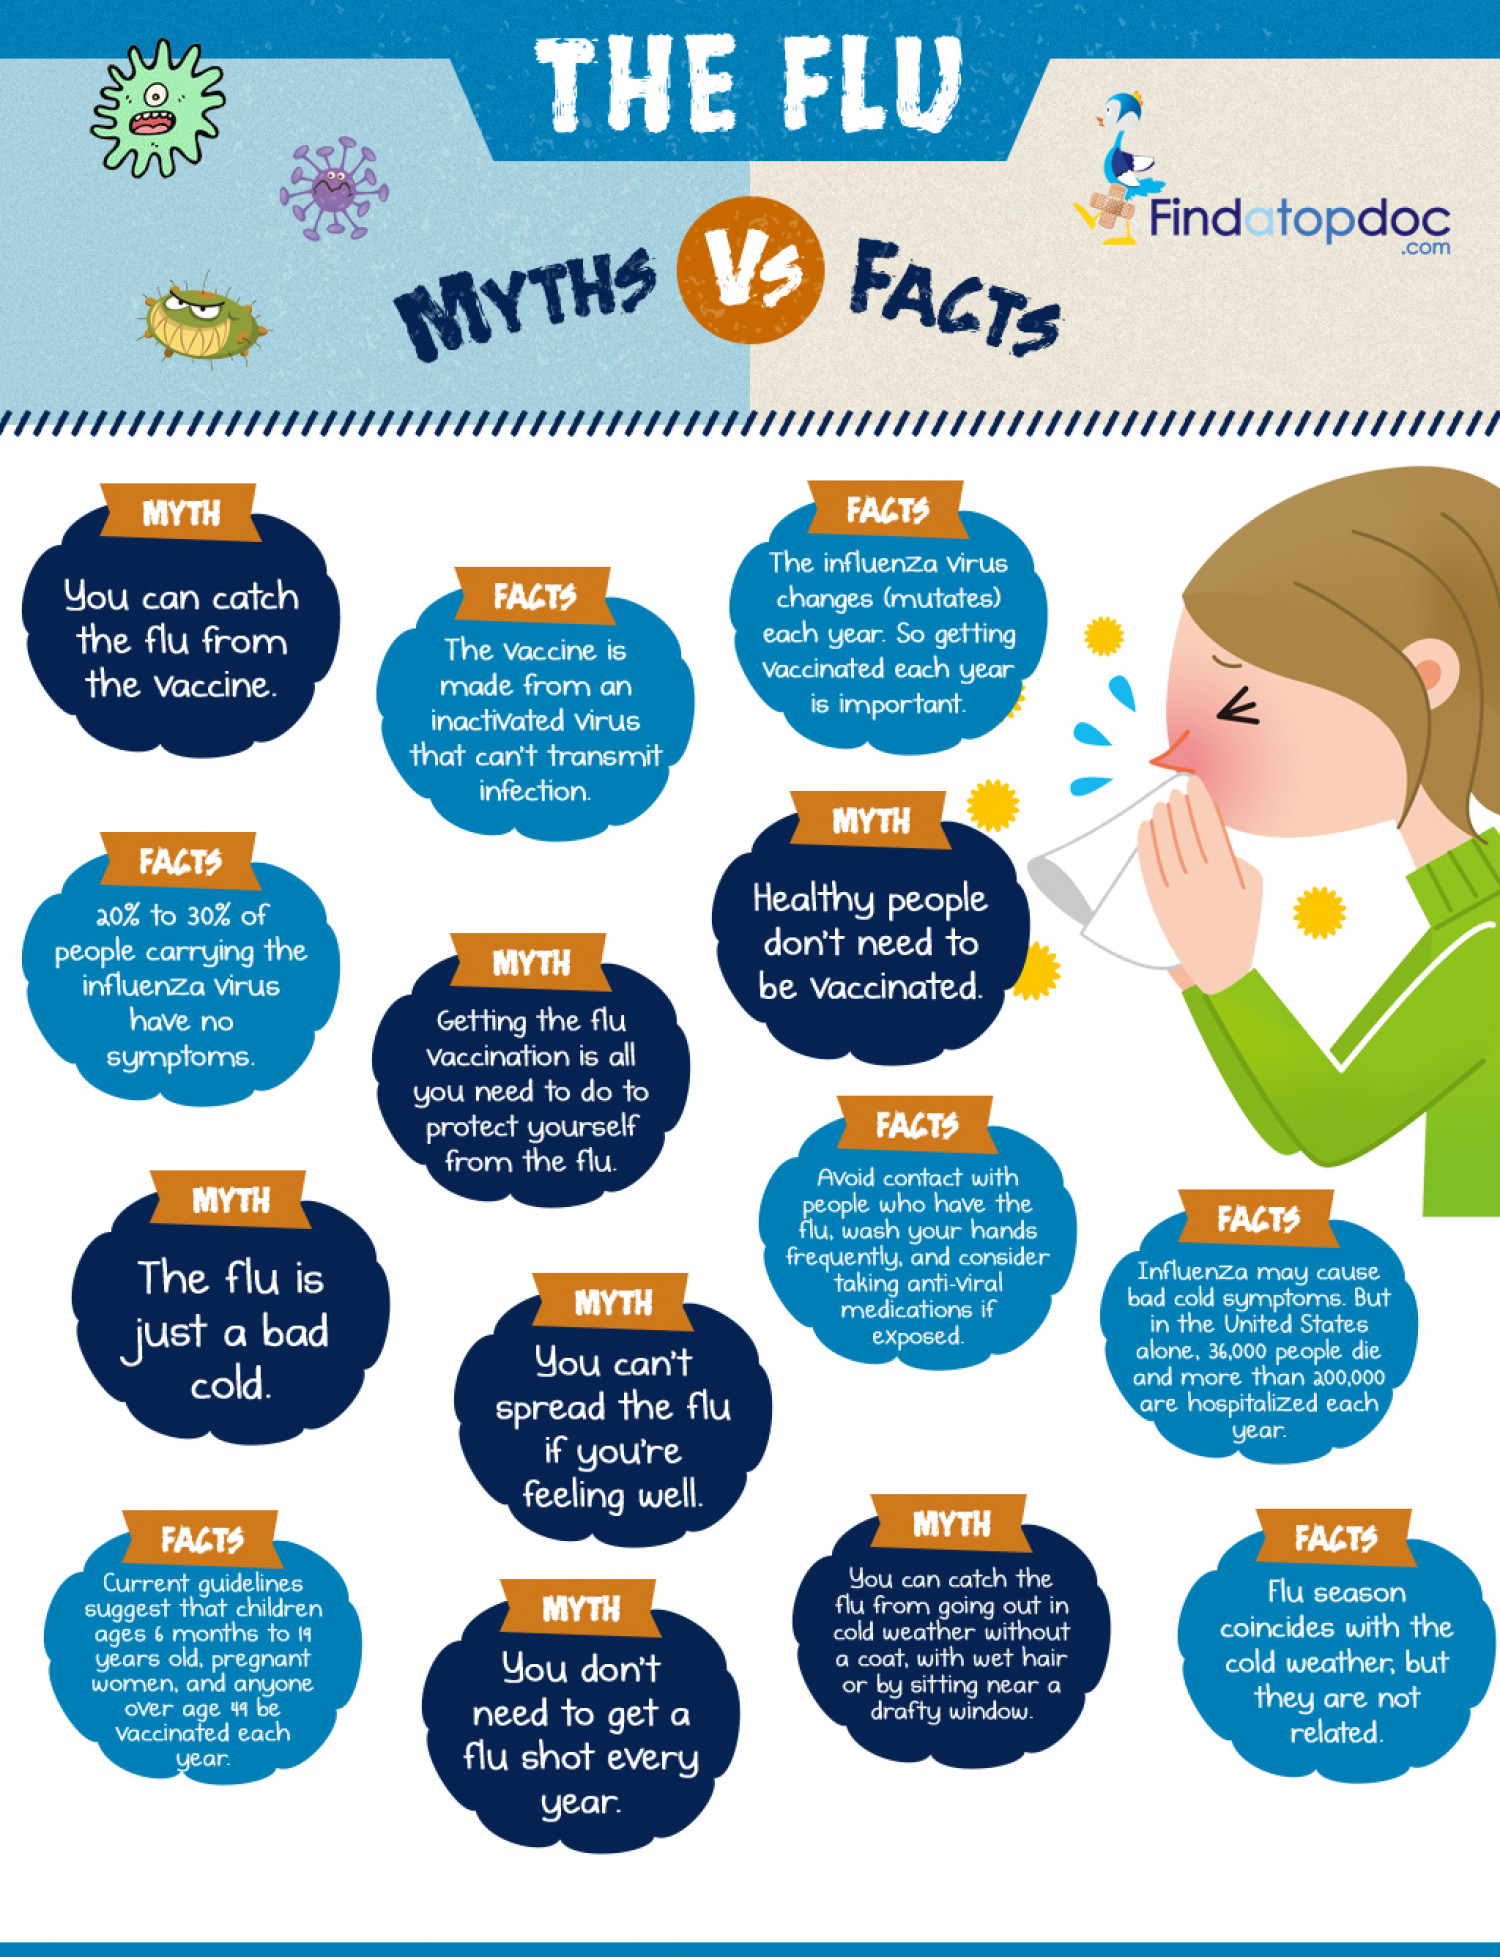 The Flu Myths Vs Facts Infographic